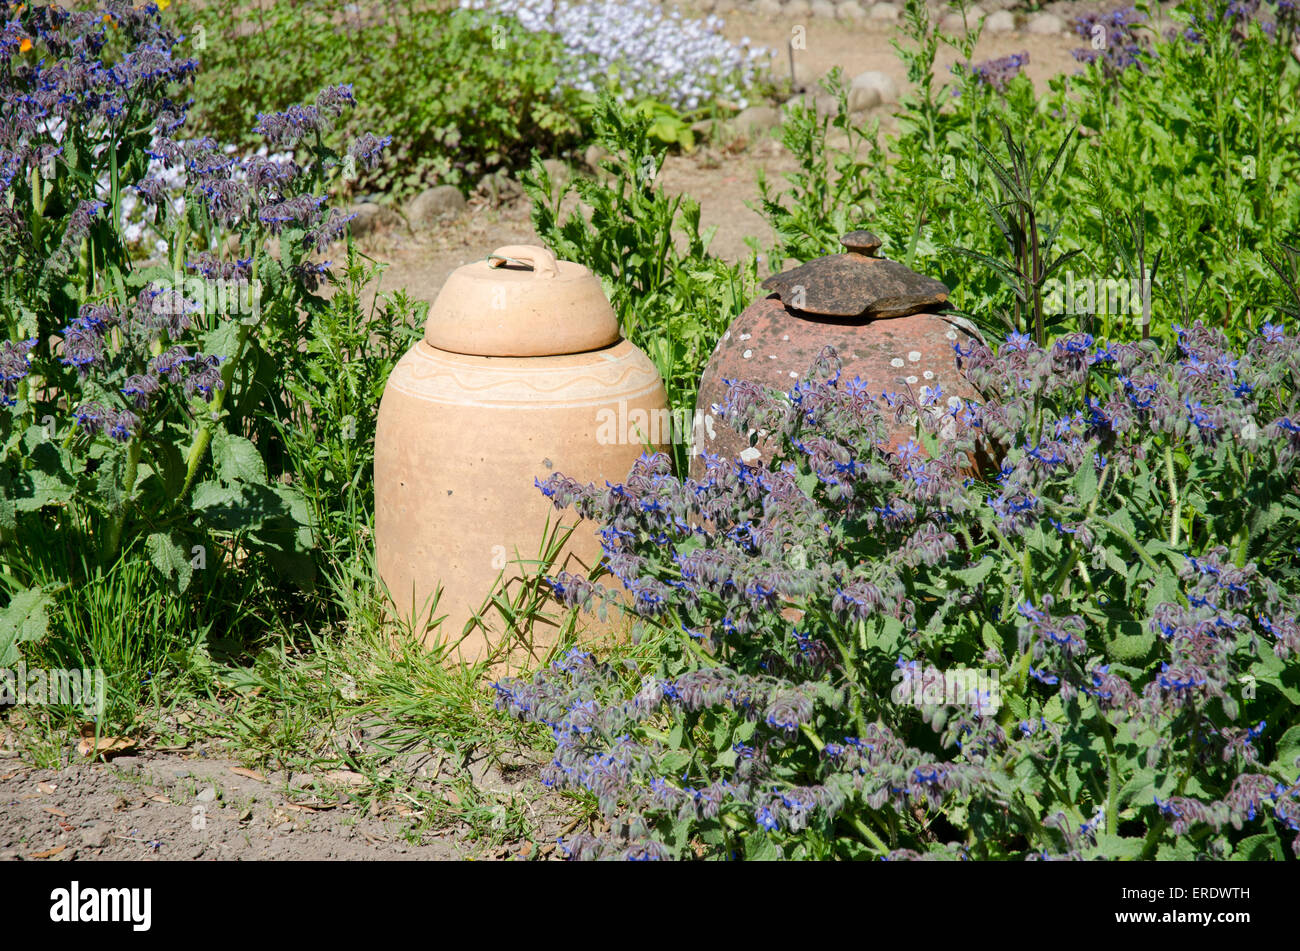 Two clay terracotta rhubarb forcers forcing jars in a garden with herb borage Stock Photo